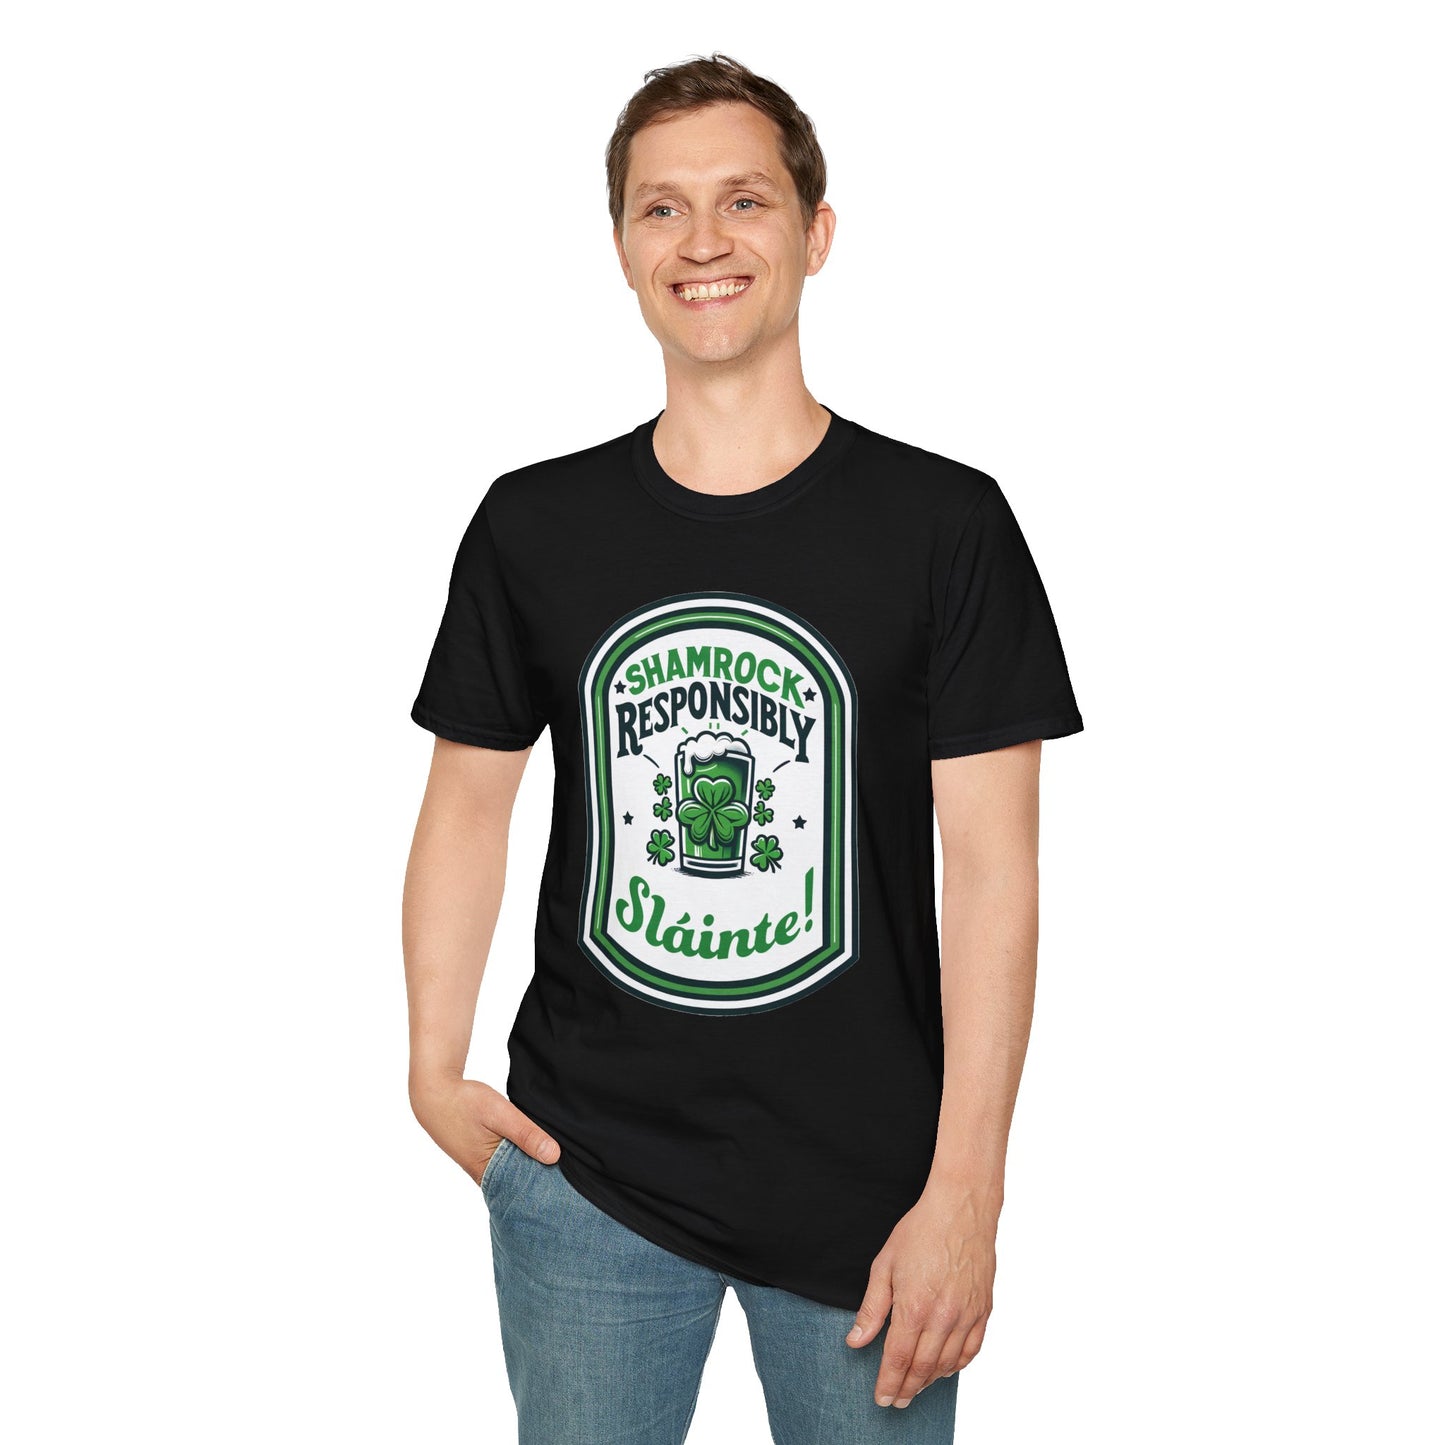 Shamrock Responsibly Slainte Softstyle T-Shirt, St. Patrick's Day Tee, Funny Lucky Beer Drinking TShirt